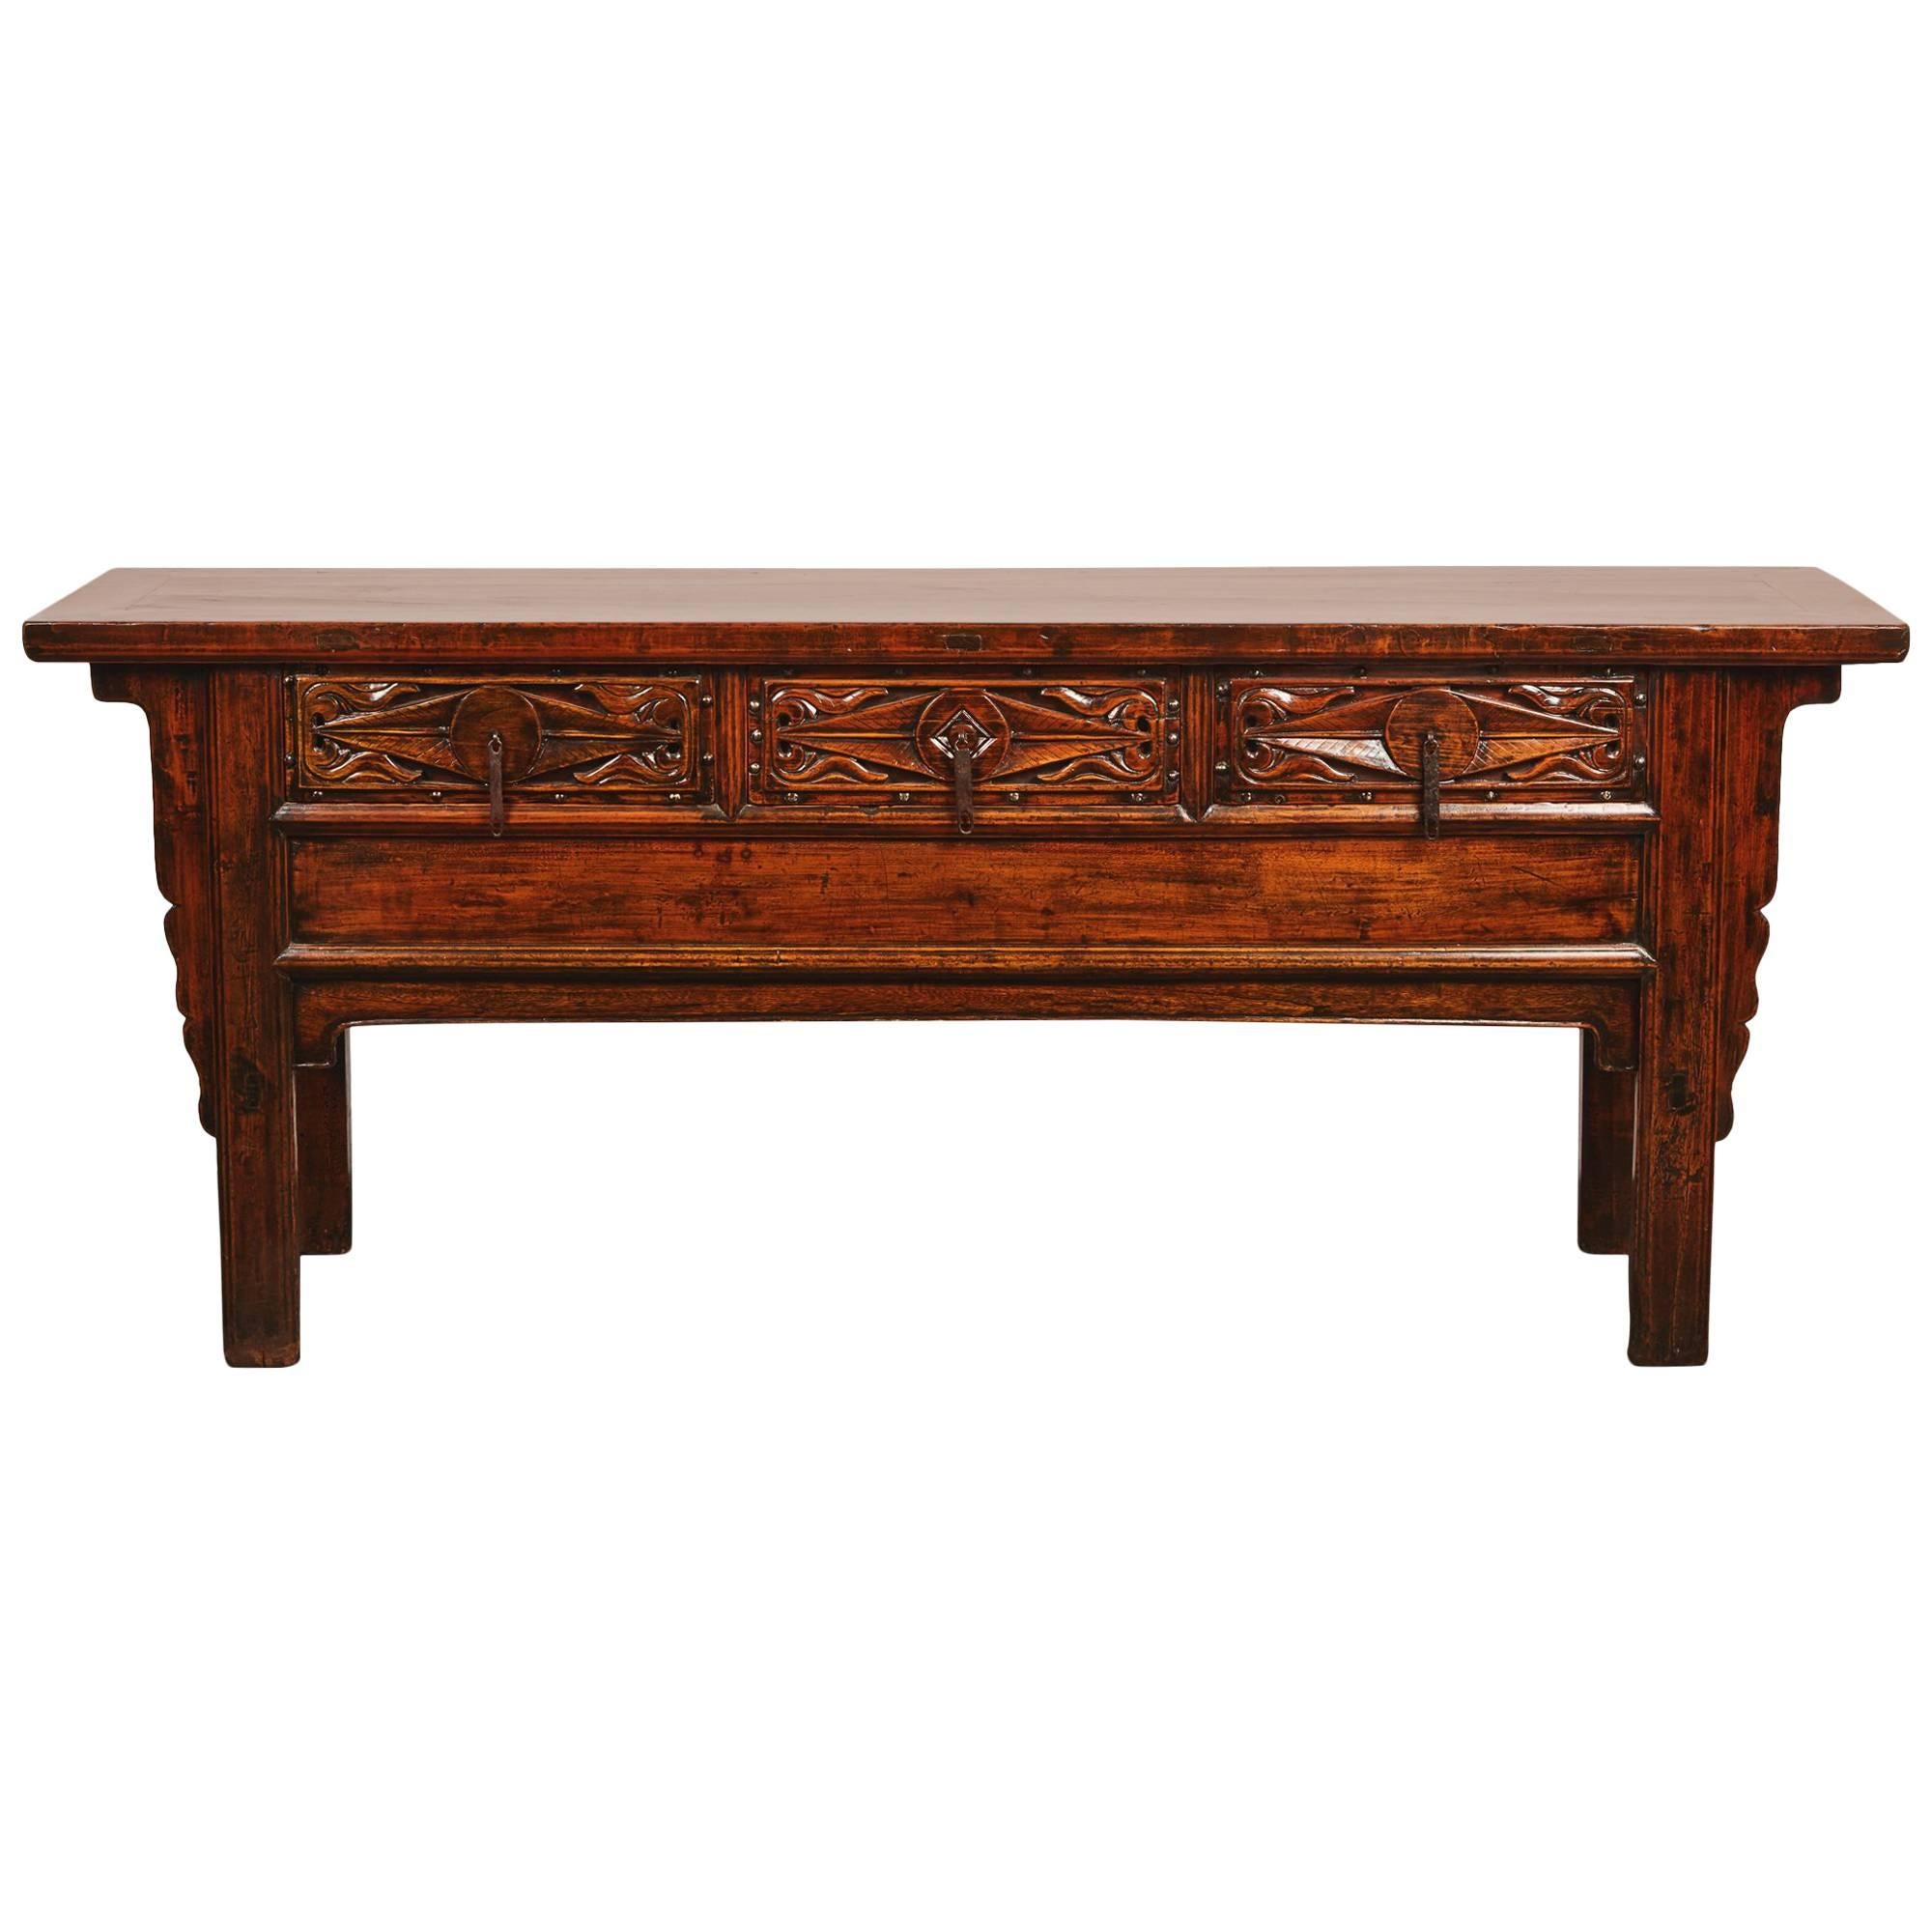 Late 18th Century Chinese Qing Elm Console Table with Drawers